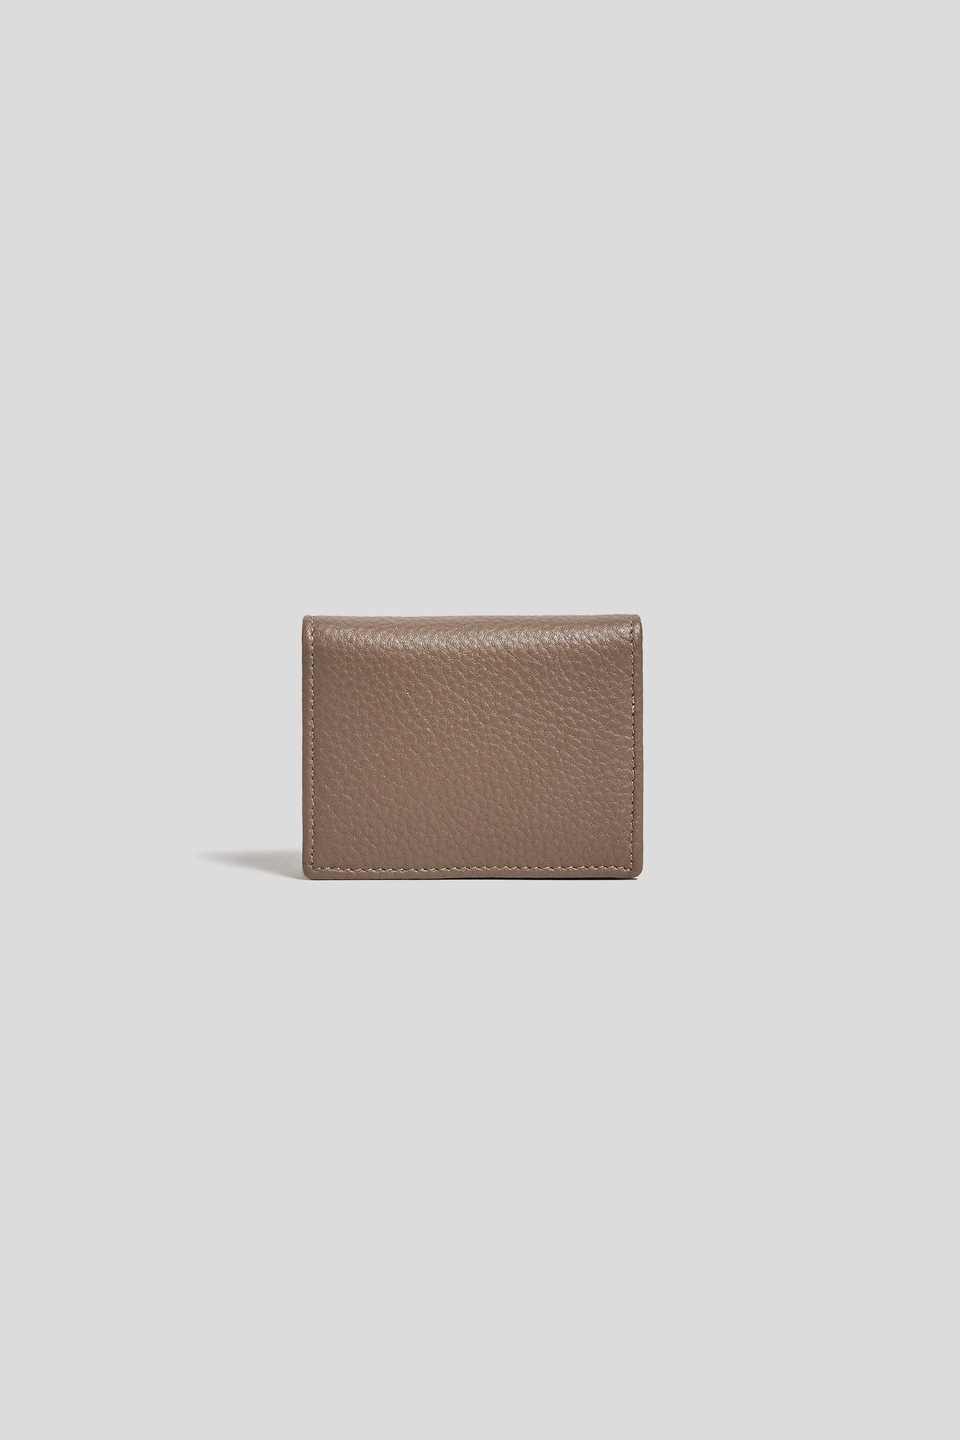 Leather wallet in solid colour | La Martina - Official Online Shop